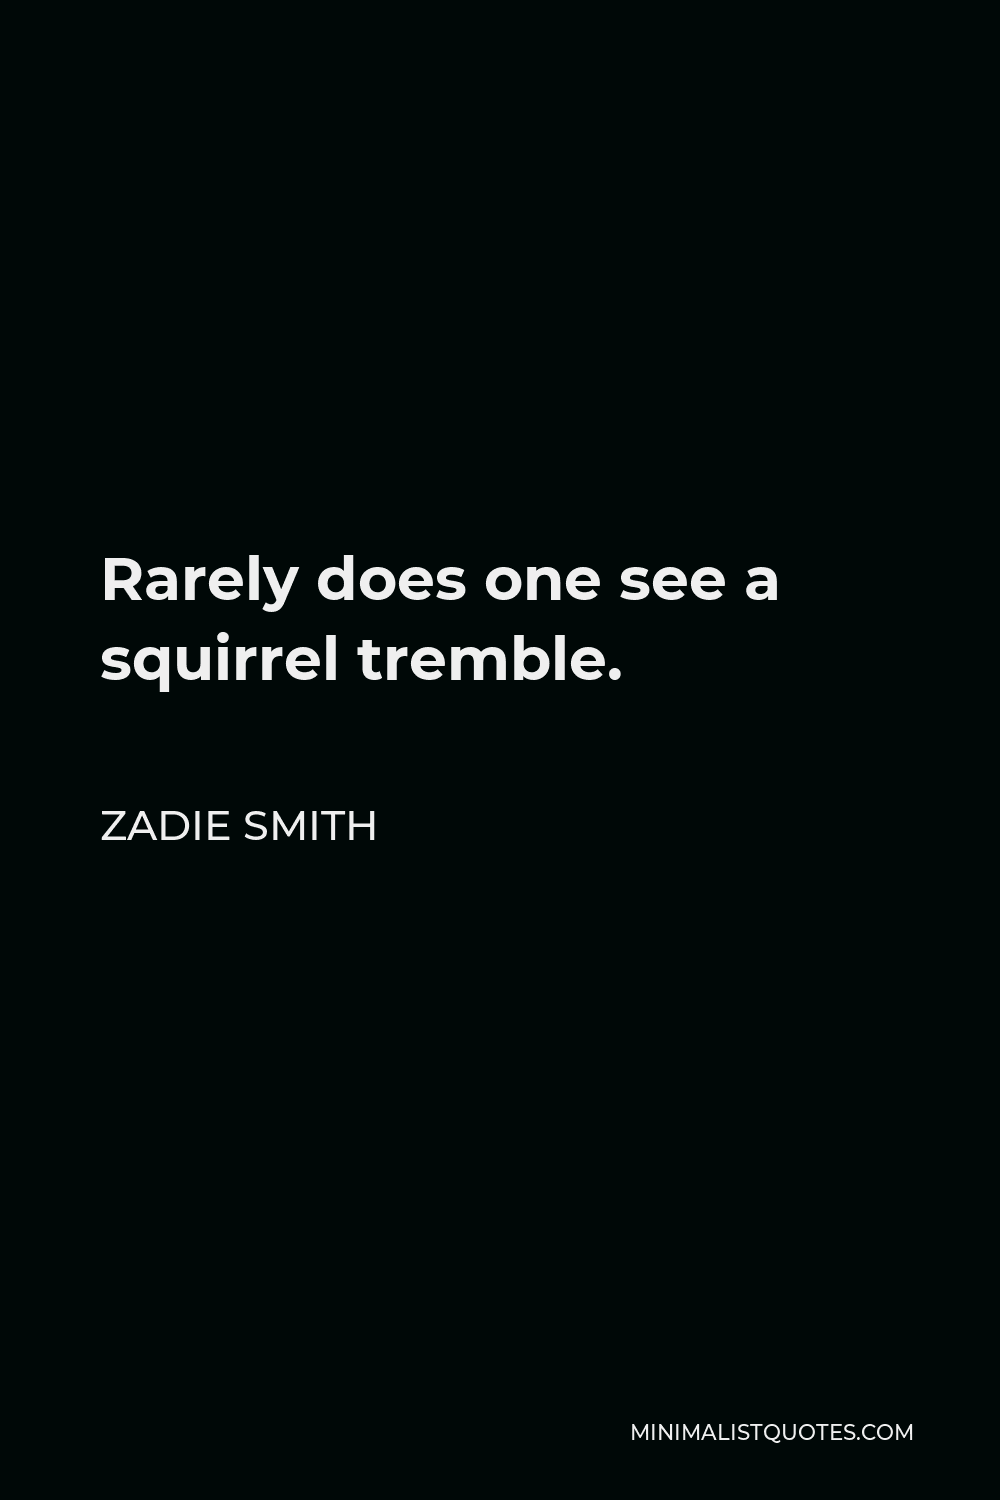 Zadie Smith Quote - Rarely does one see a squirrel tremble.